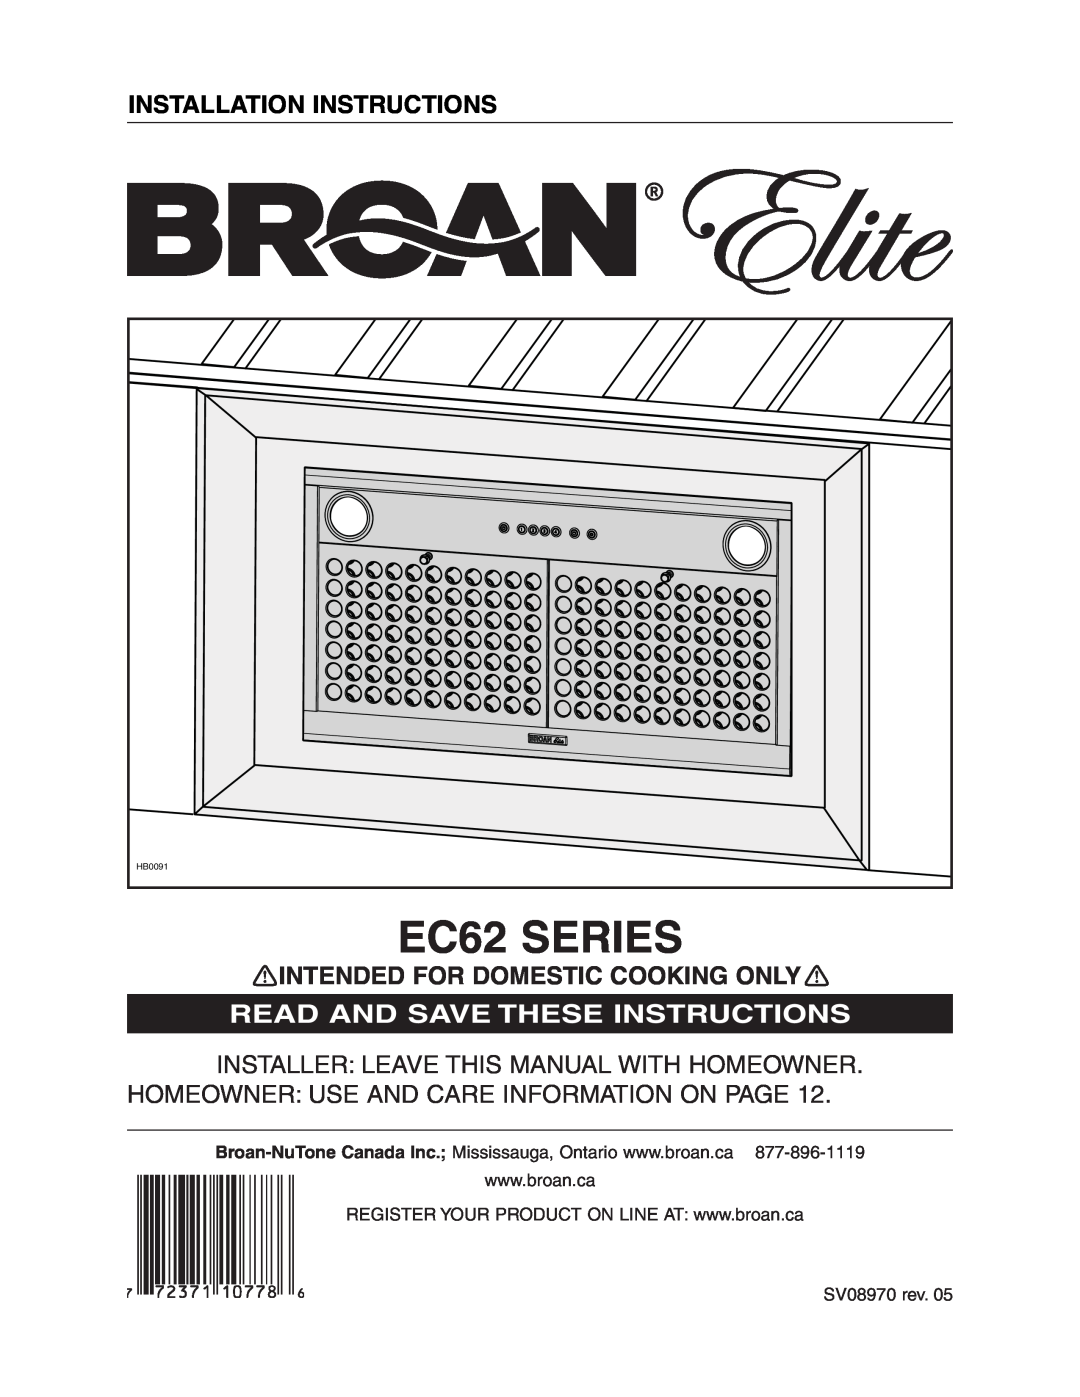 Broan 441, 418, 410 manual SV08970 rev, EC62 SERIES, Installation Instructions, Intended For Domestic Cooking Only, HB0091 